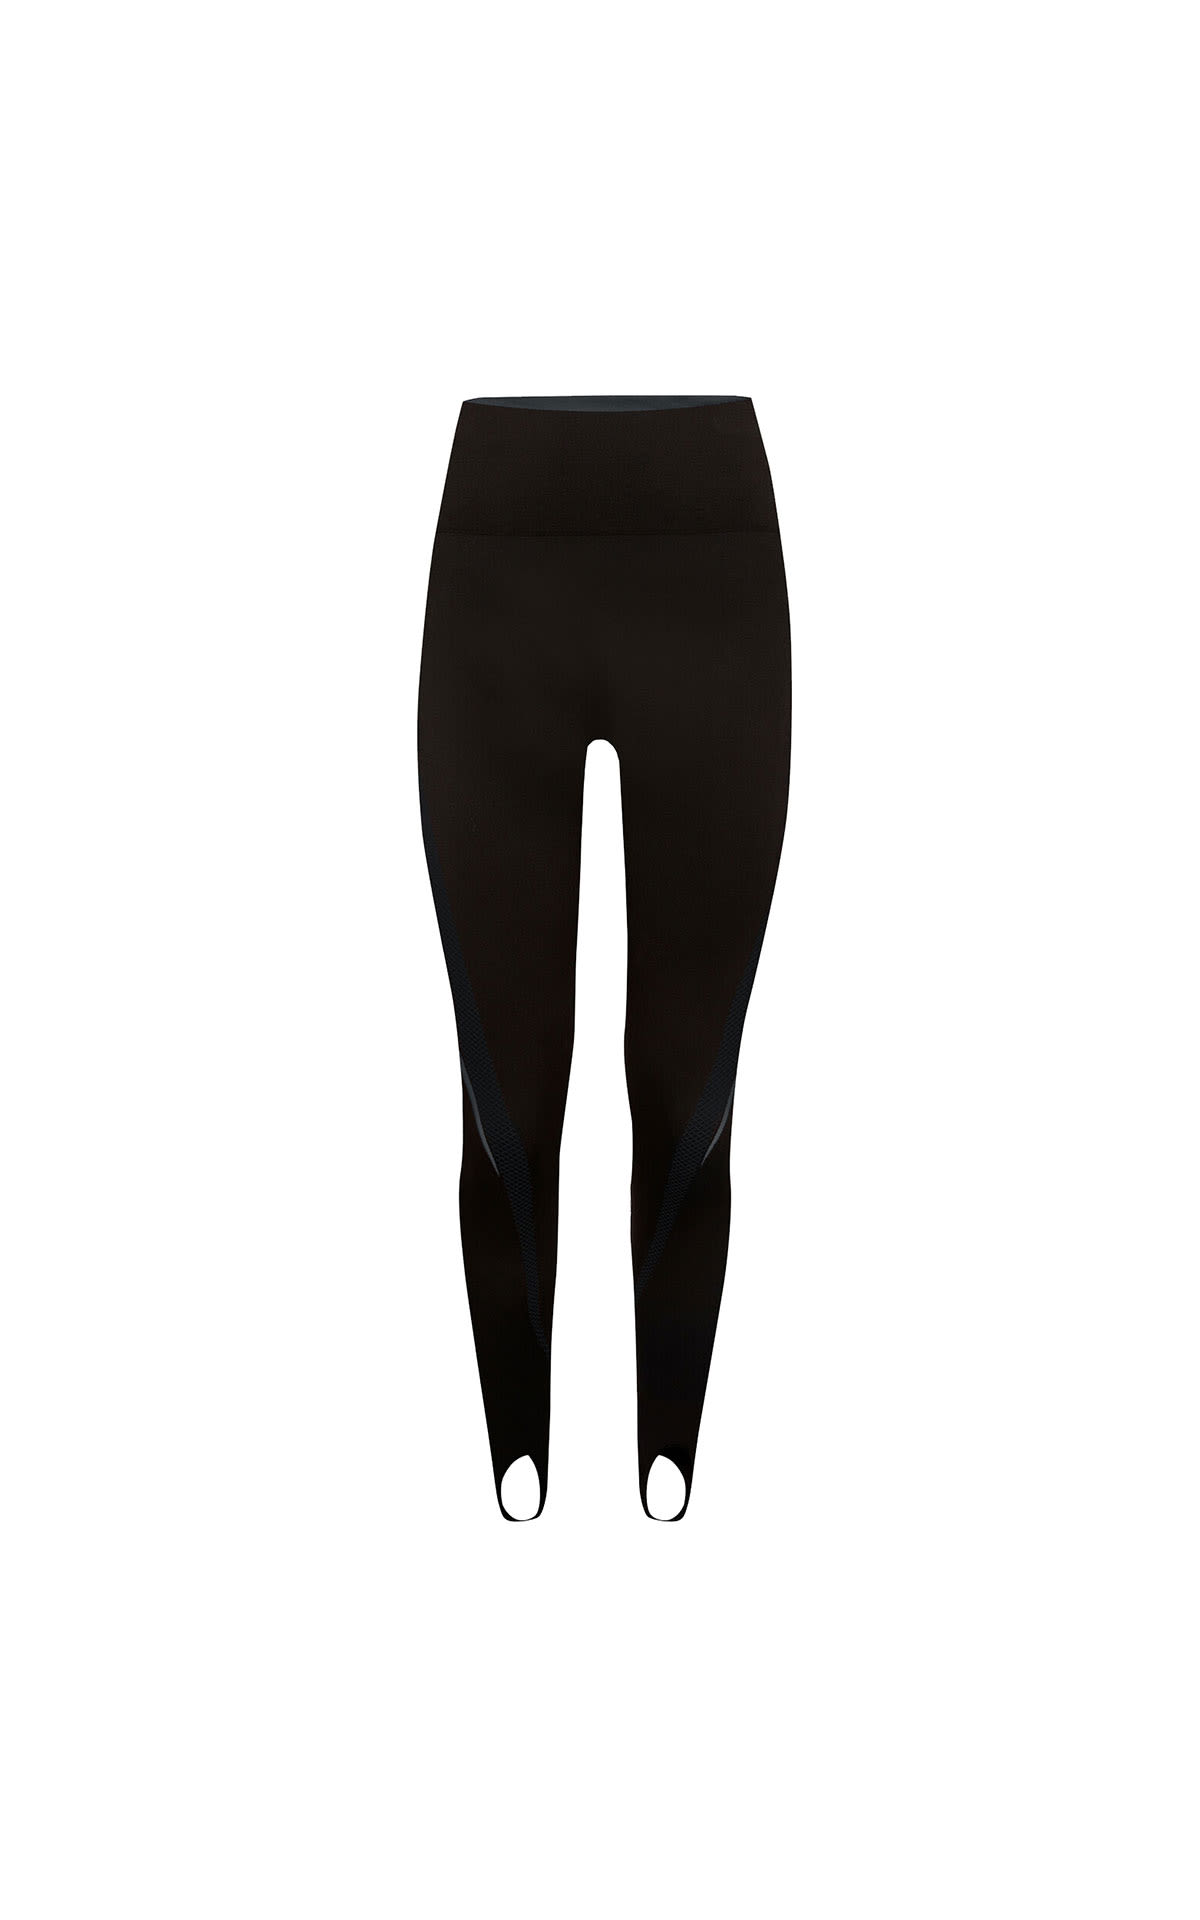 Wolford Sporty butterly stirrup legging from Bicester Village